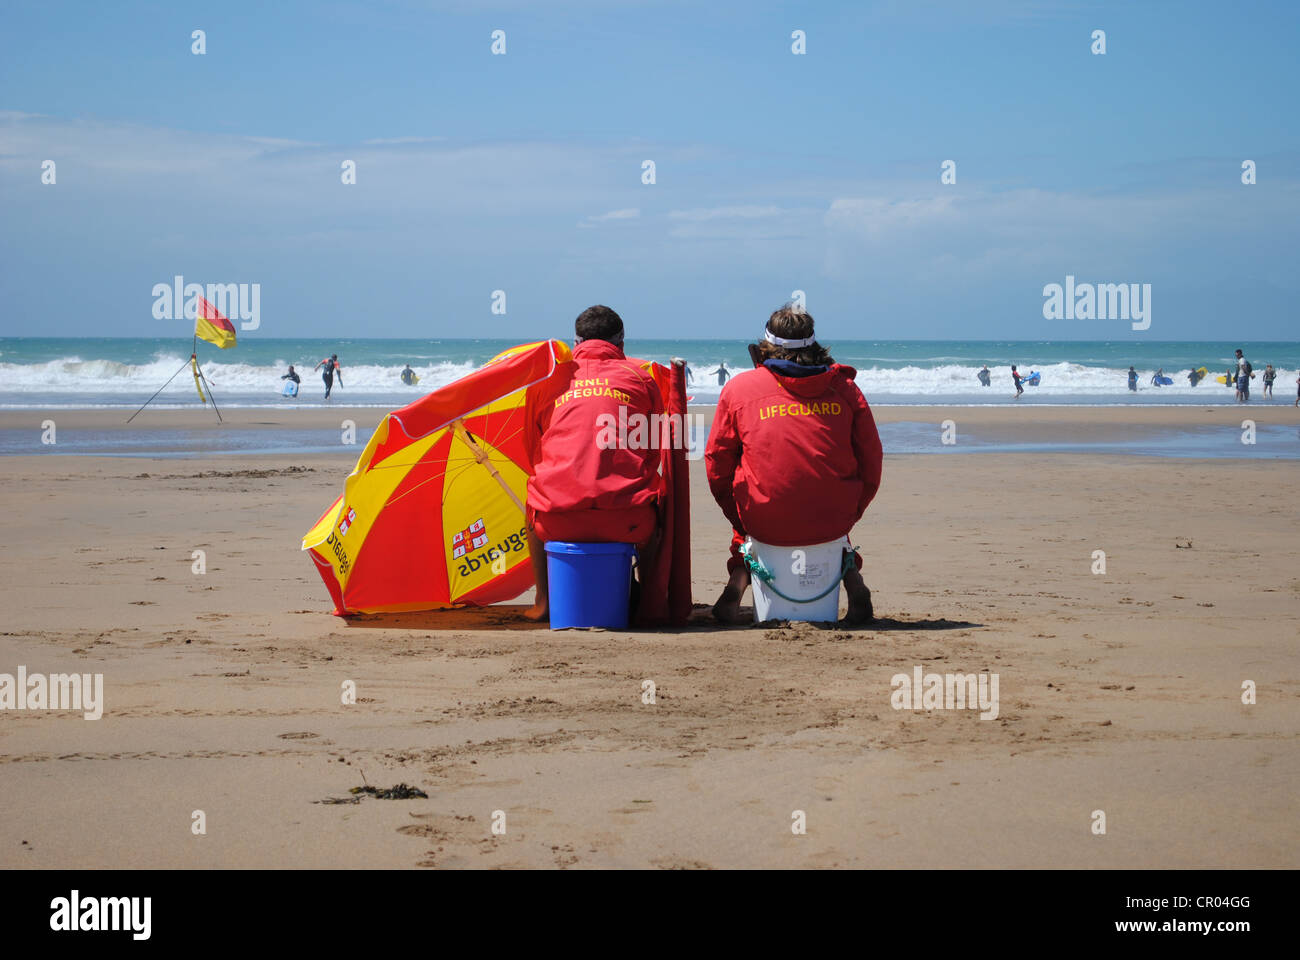 Life Guards on duty Stock Photo